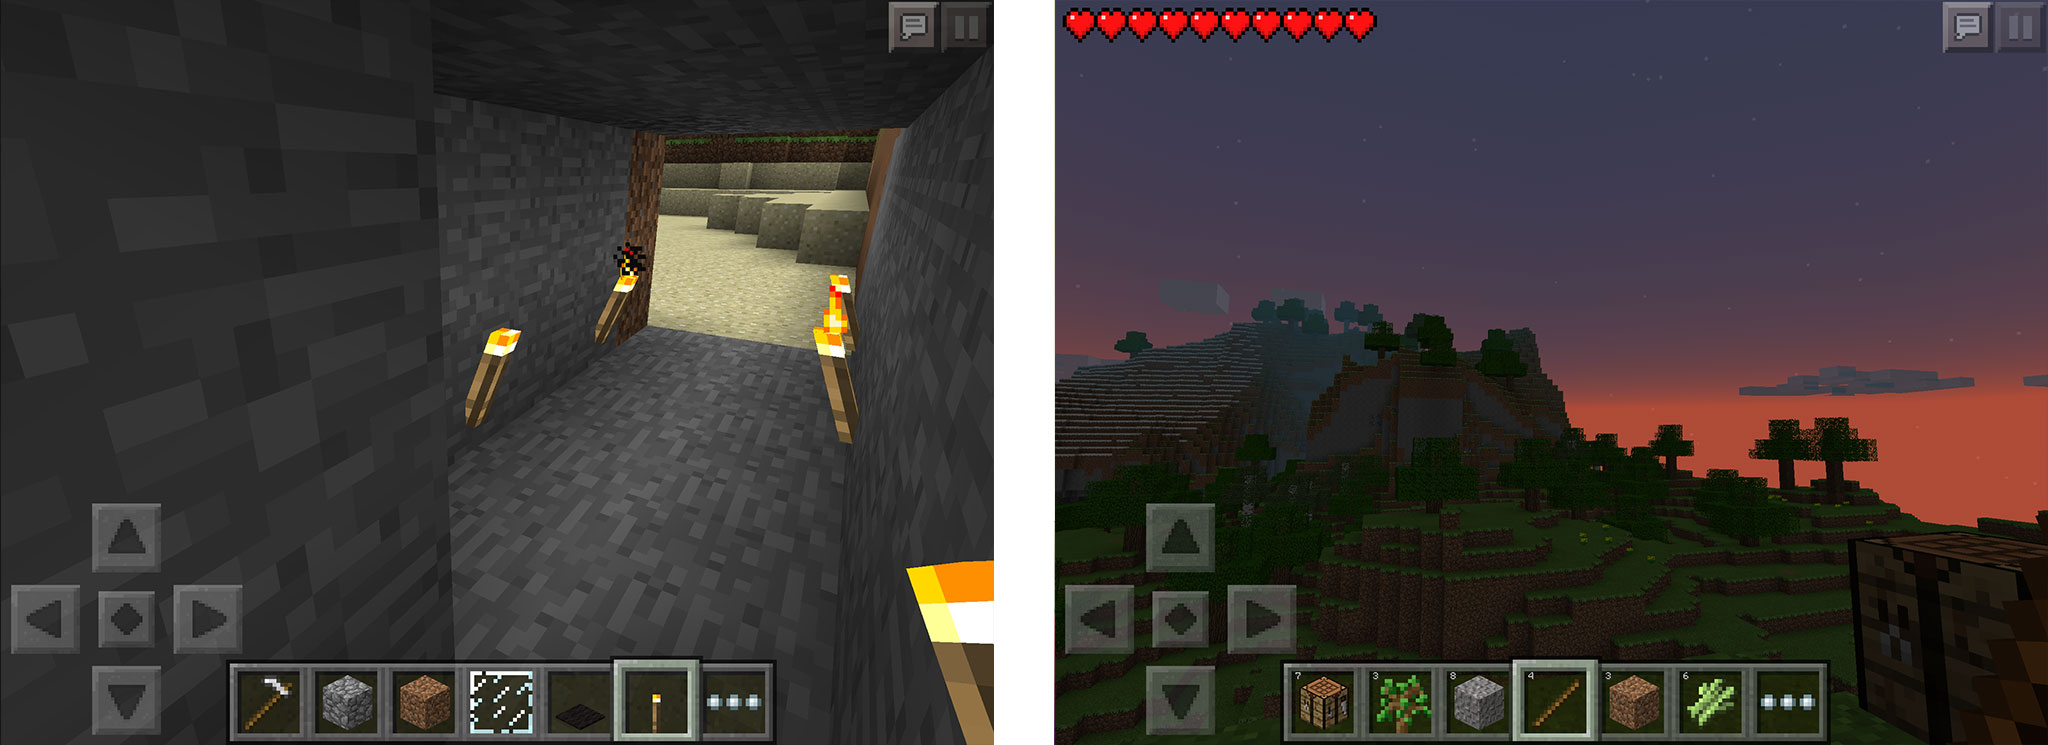 Minecraft Pocket Edition: Top 10 tips, hints, and cheats!